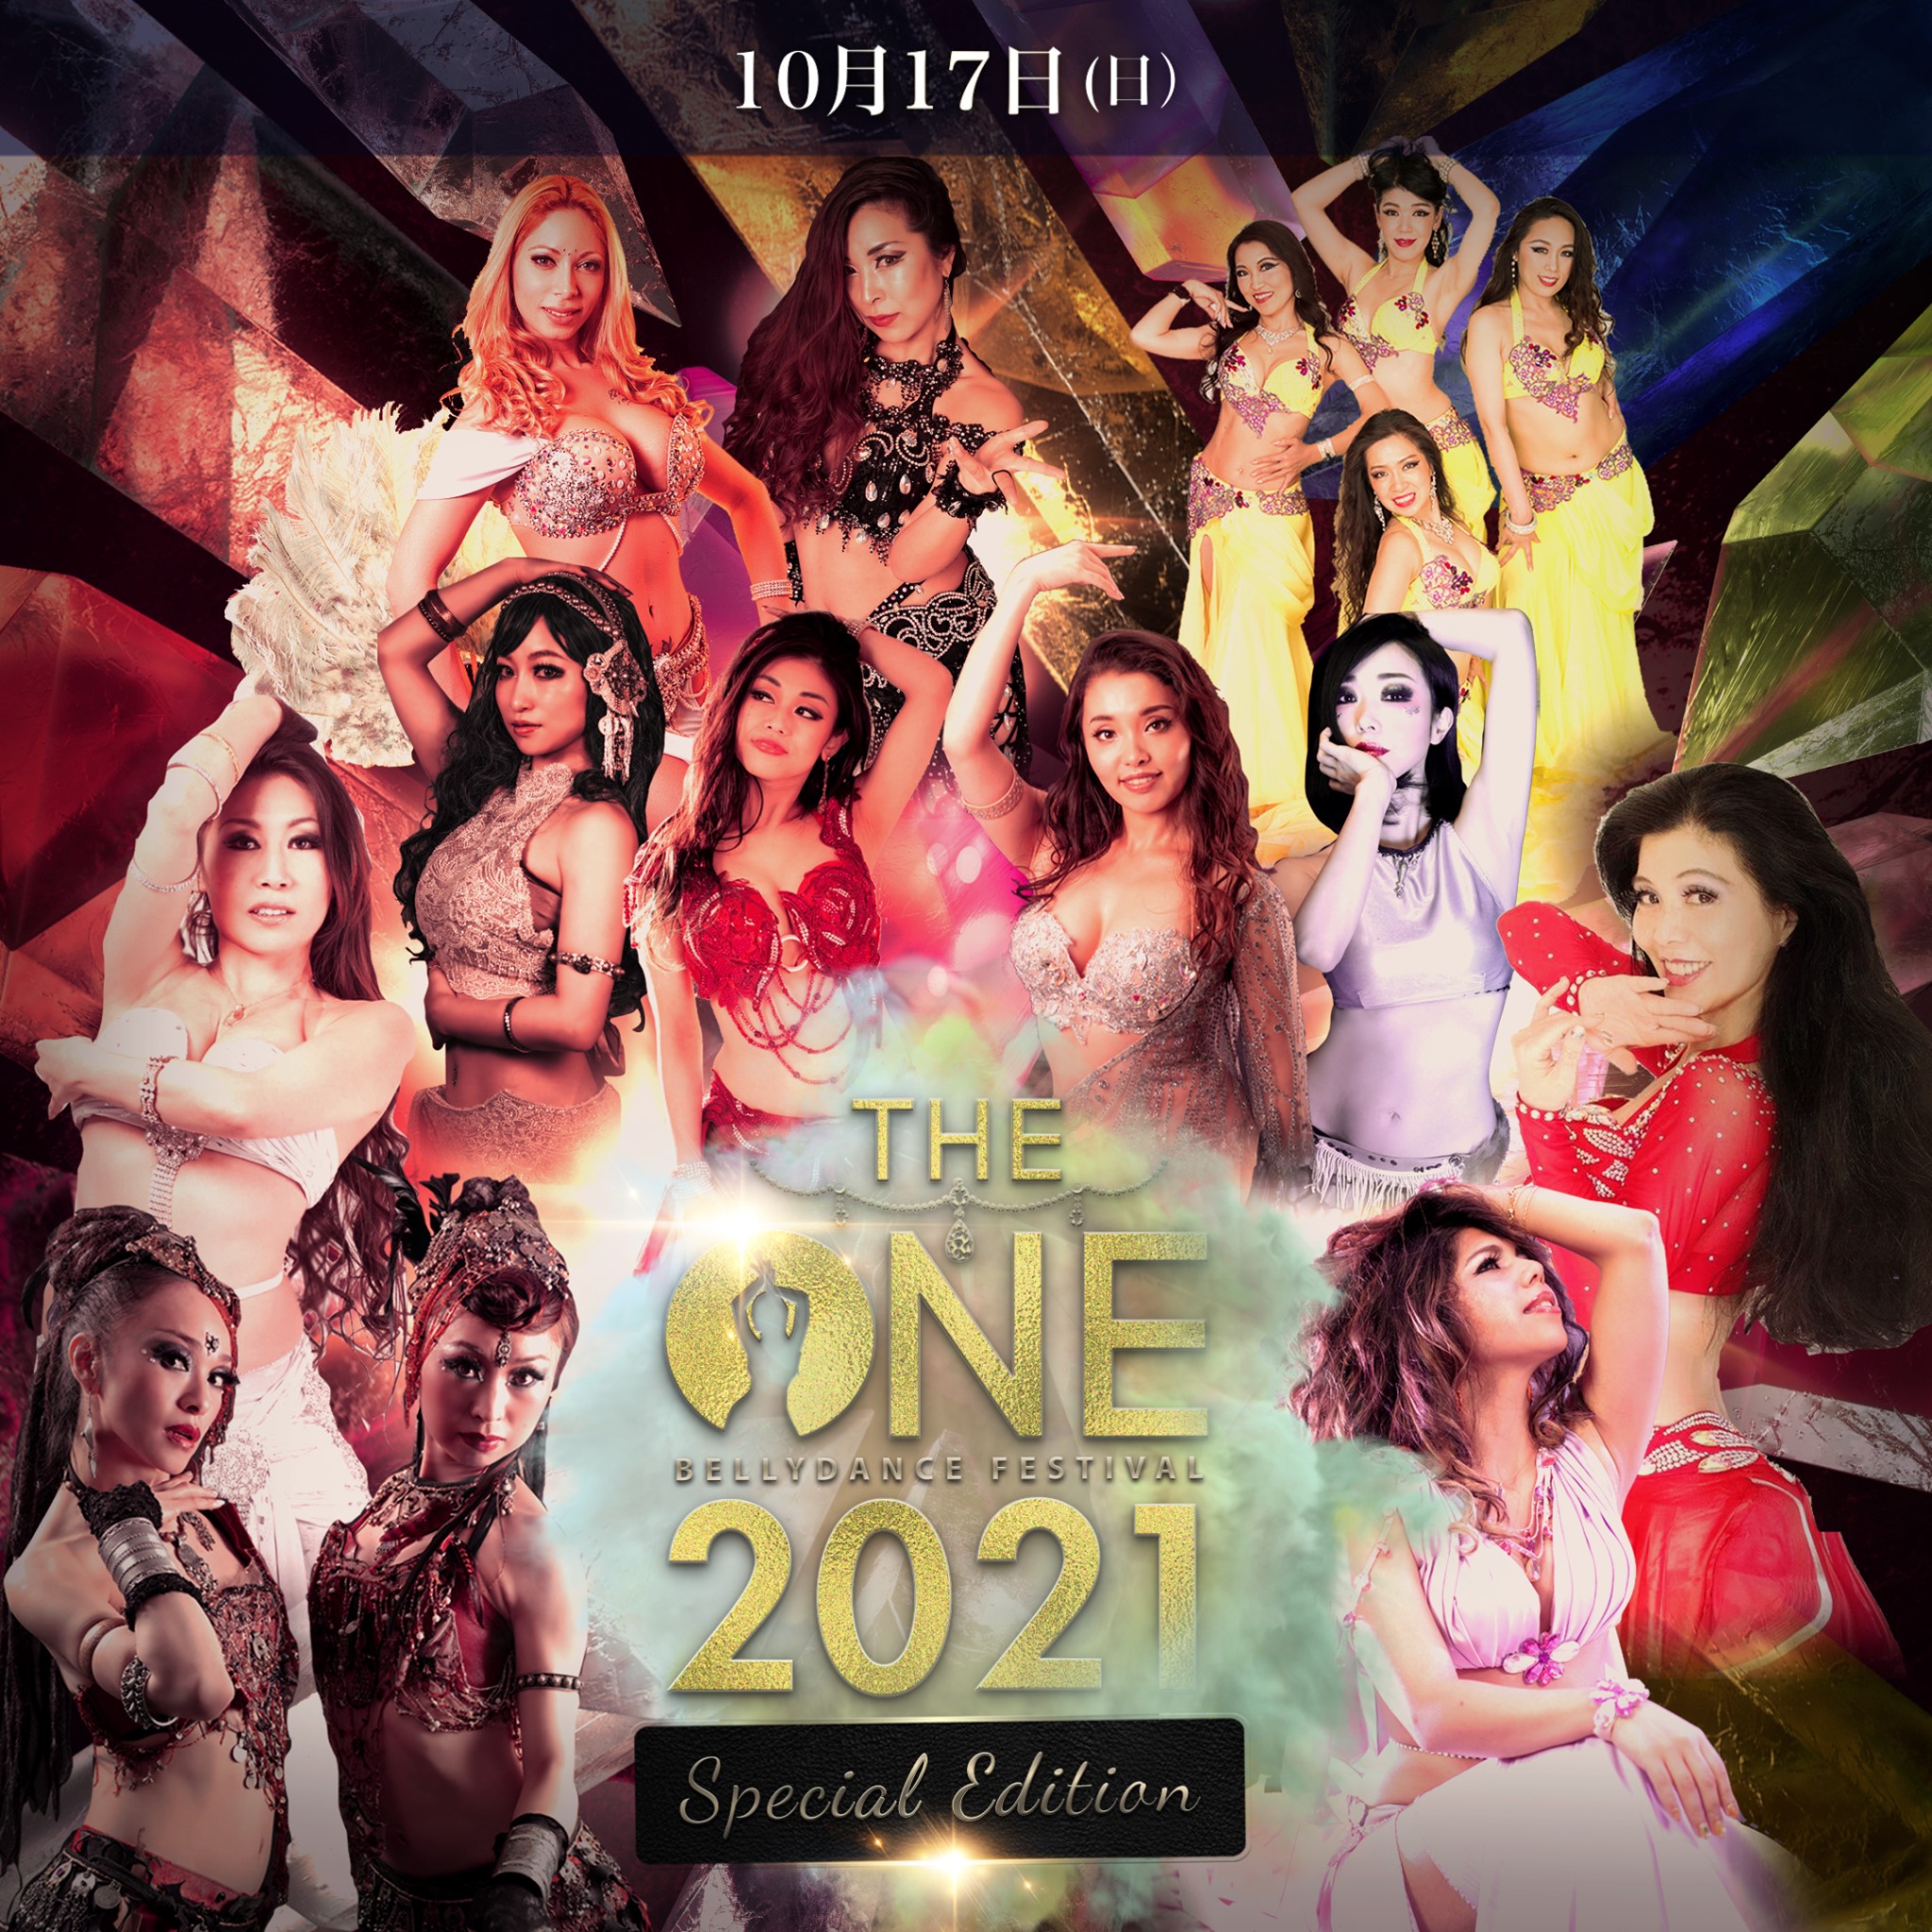 BellyDance Festival-TheONE-2021　Special edition　17日公演